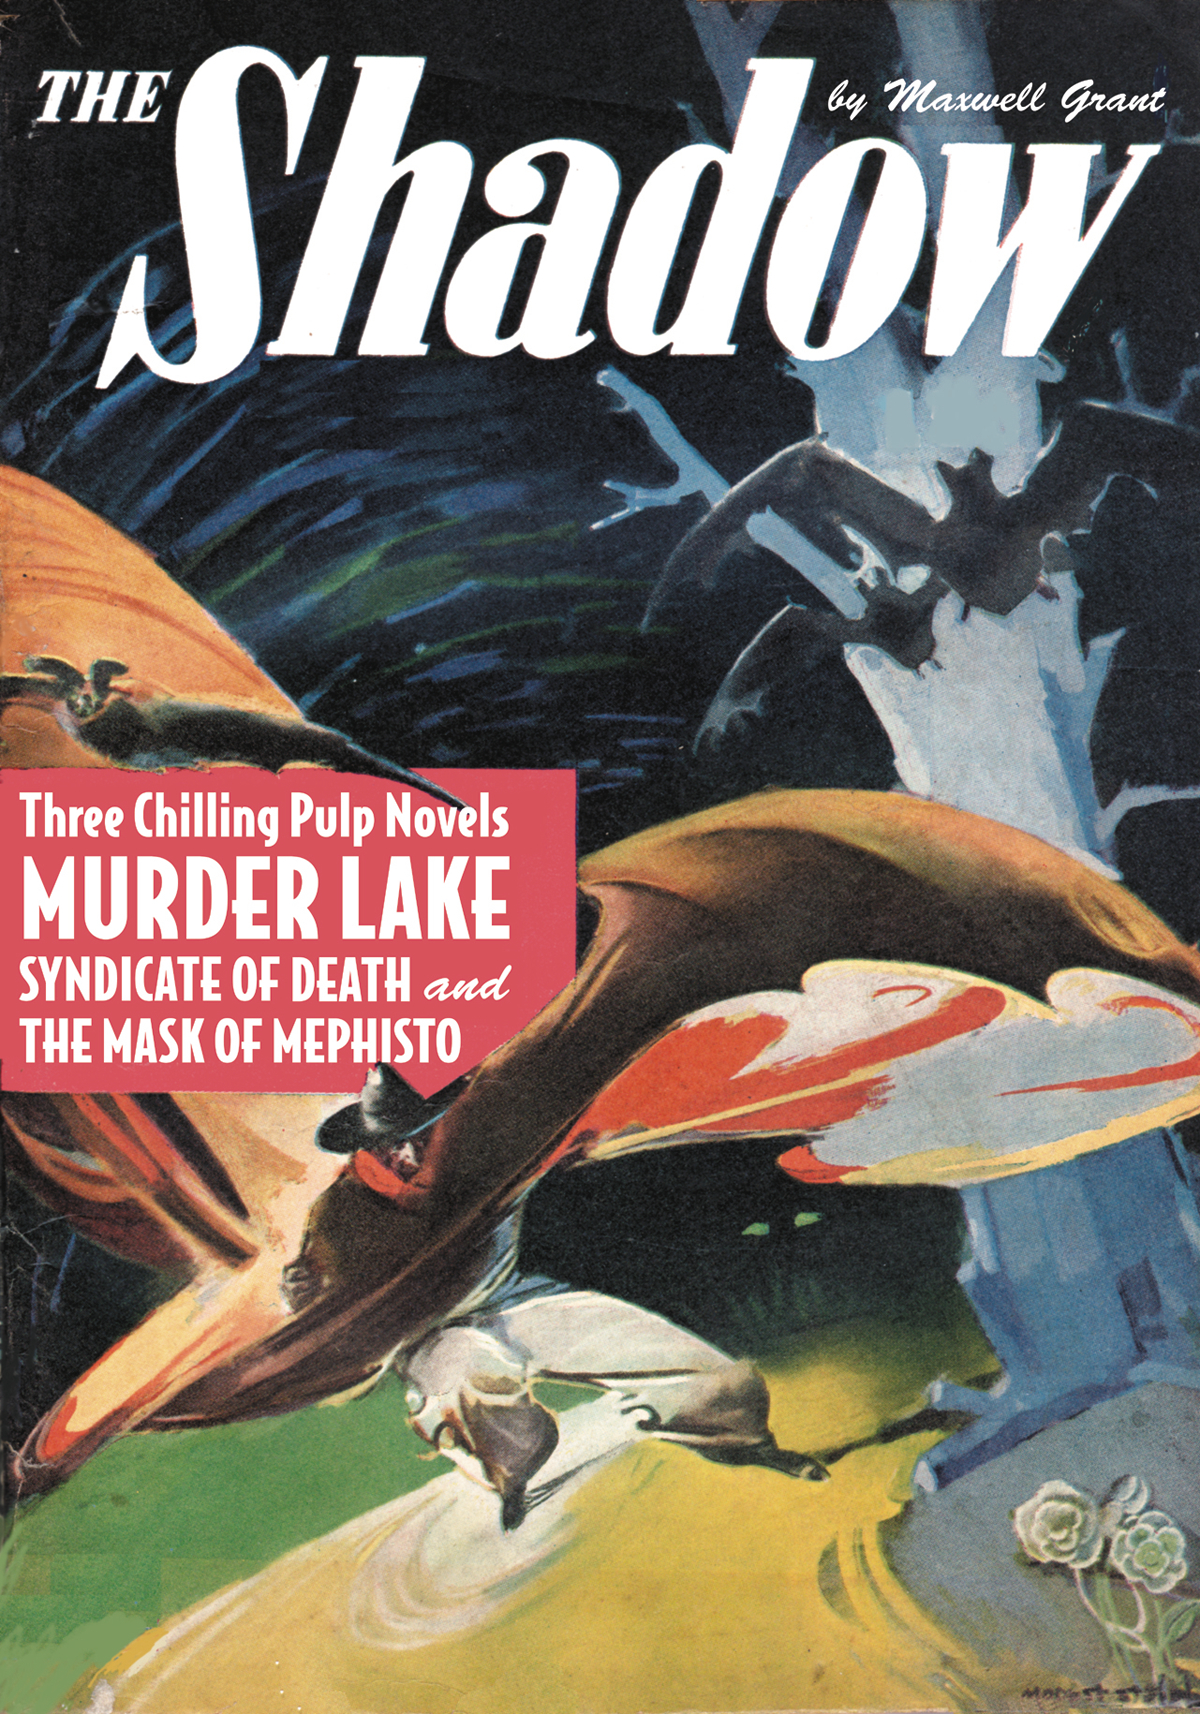 SHADOW DOUBLE NOVEL VOL 140 MURDER LAKE SYNDICATE OF DEATH (